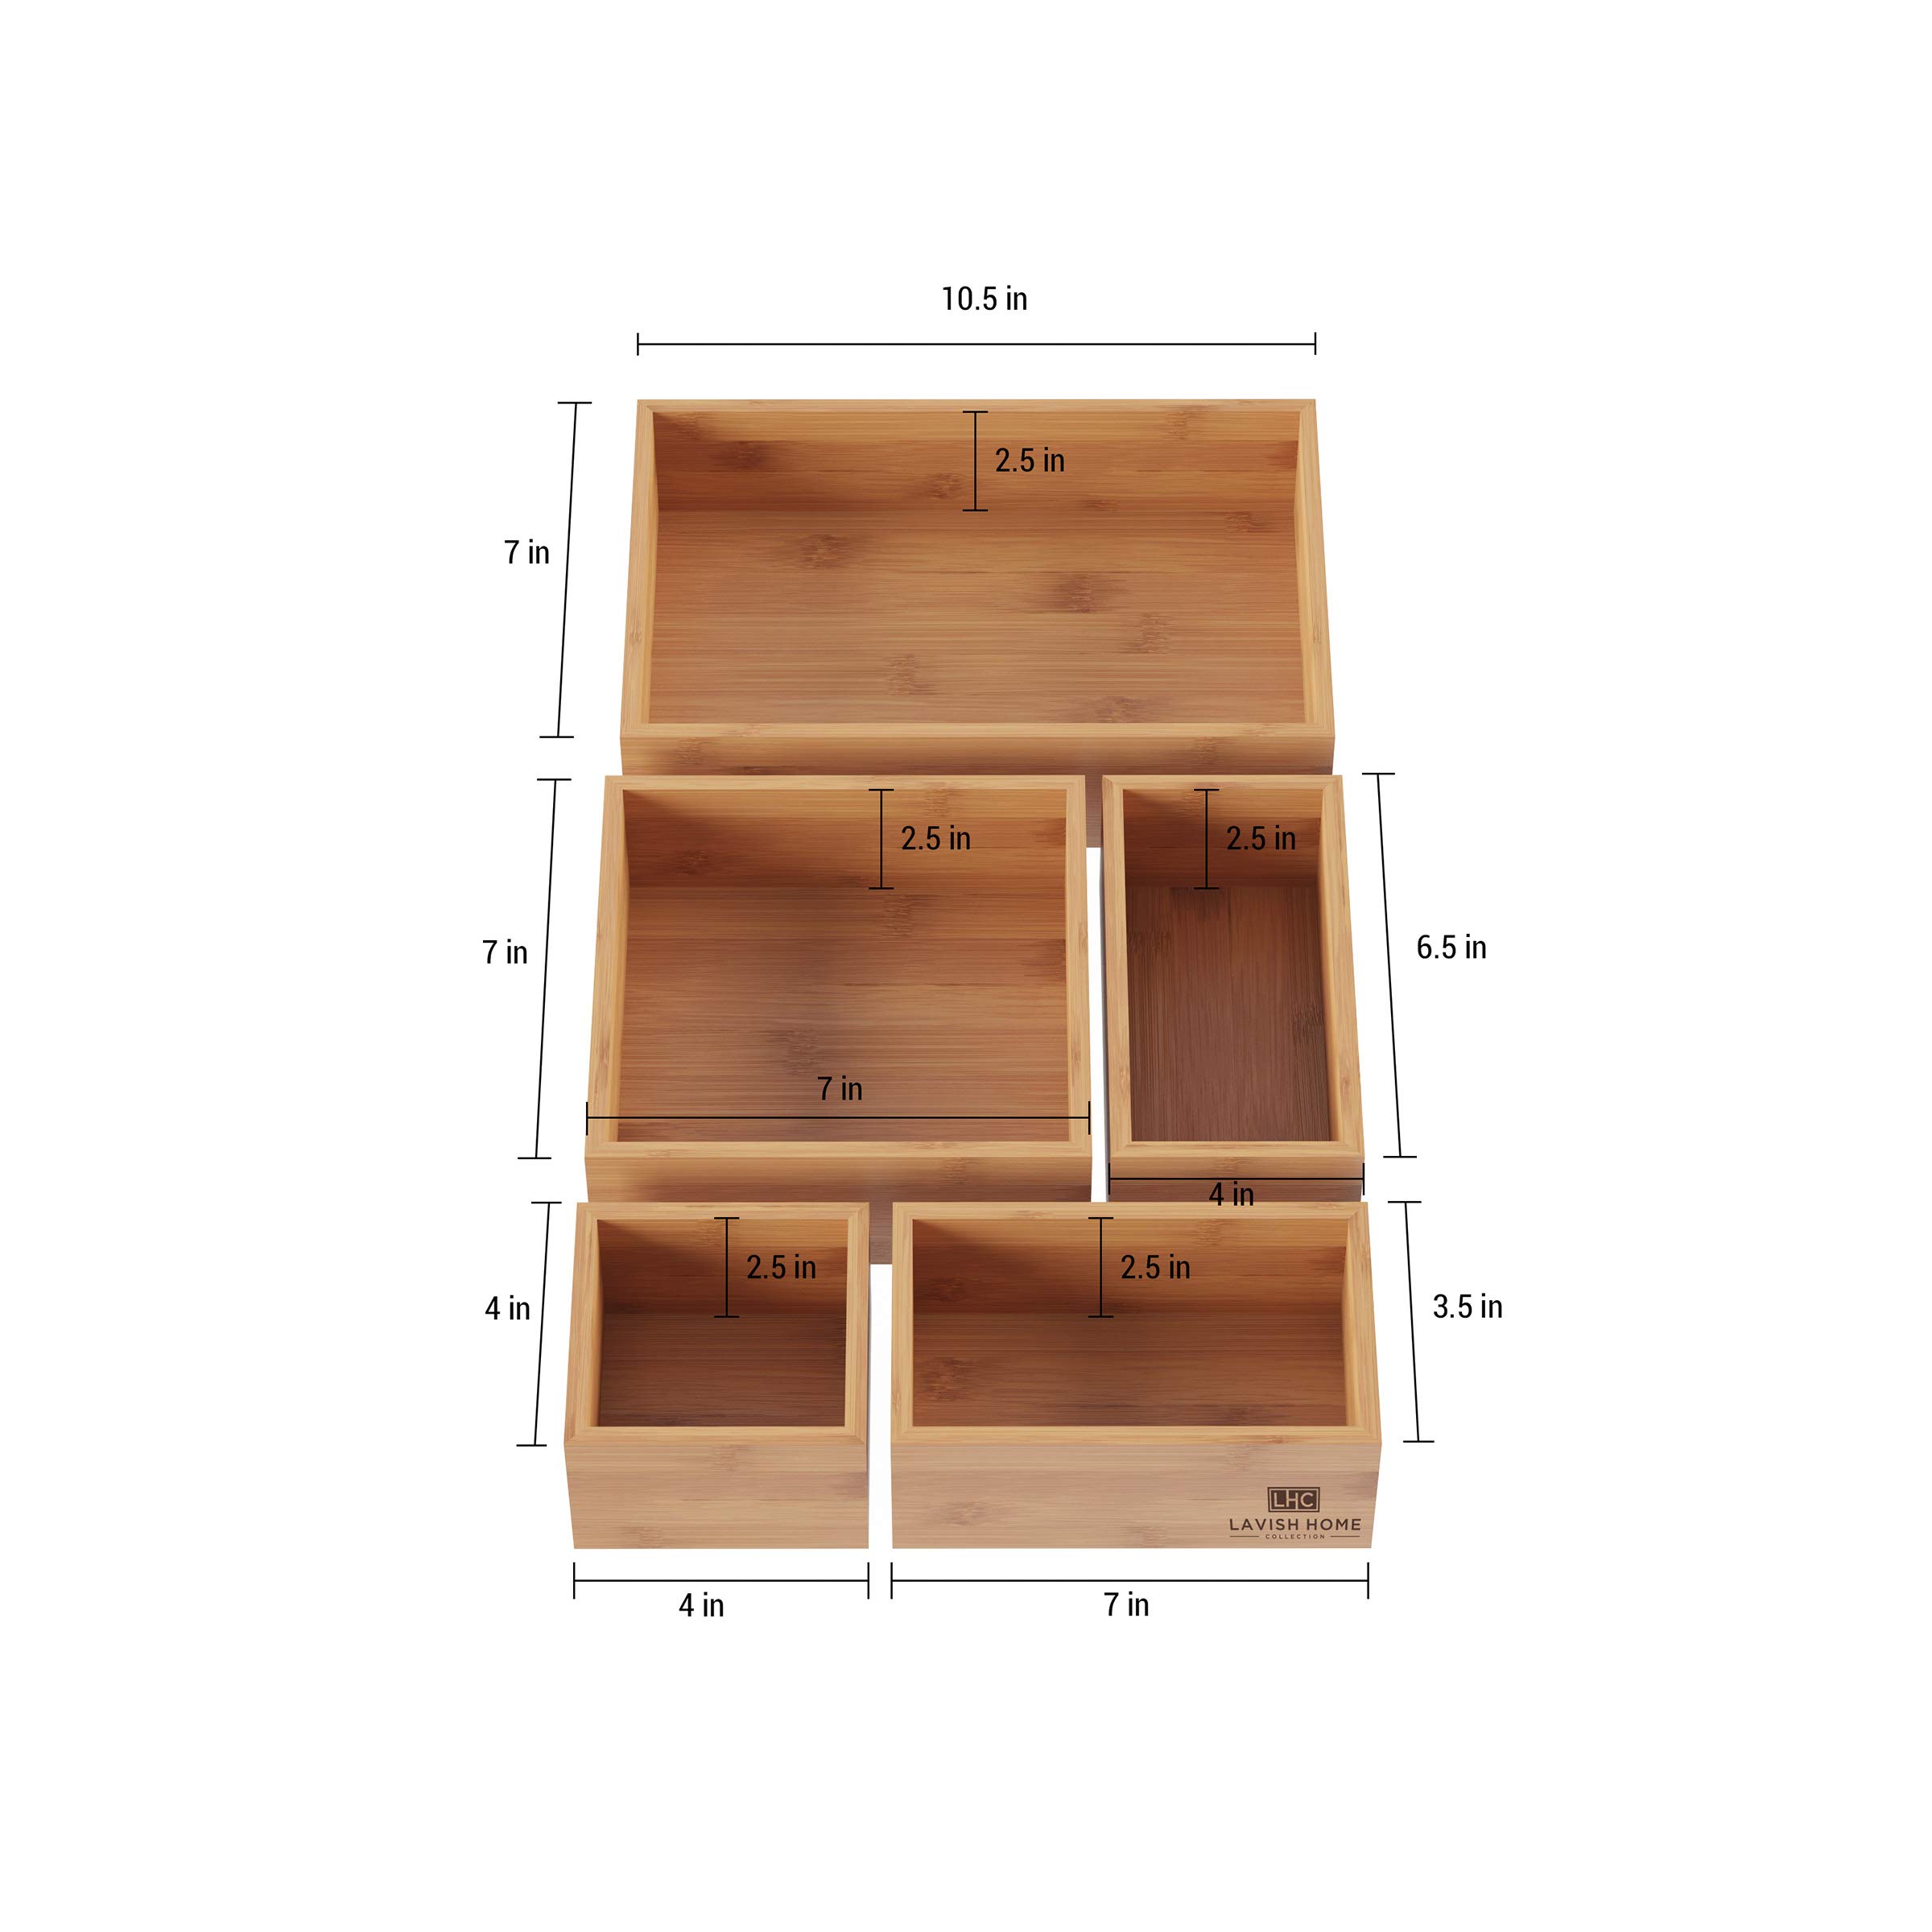 Lavish Home Drawer Organizer – 5 Compartment Modular Natural Wood Bamboo Space Saver Tray Storage for Kitchen, Office, Bedroom and Bathroom